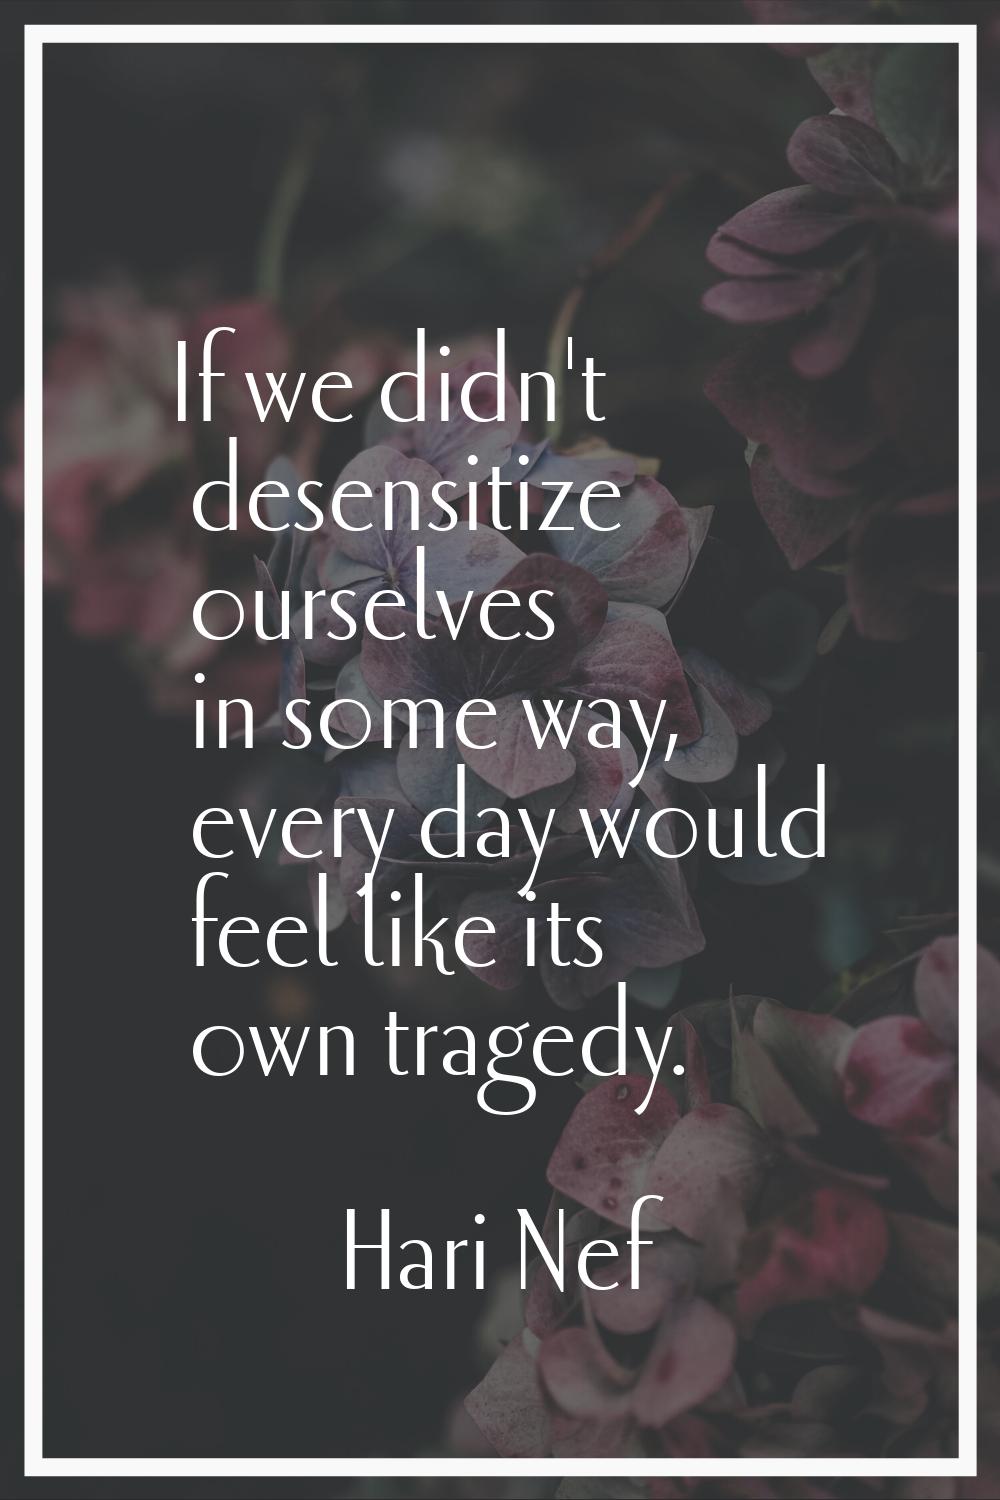 If we didn't desensitize ourselves in some way, every day would feel like its own tragedy.